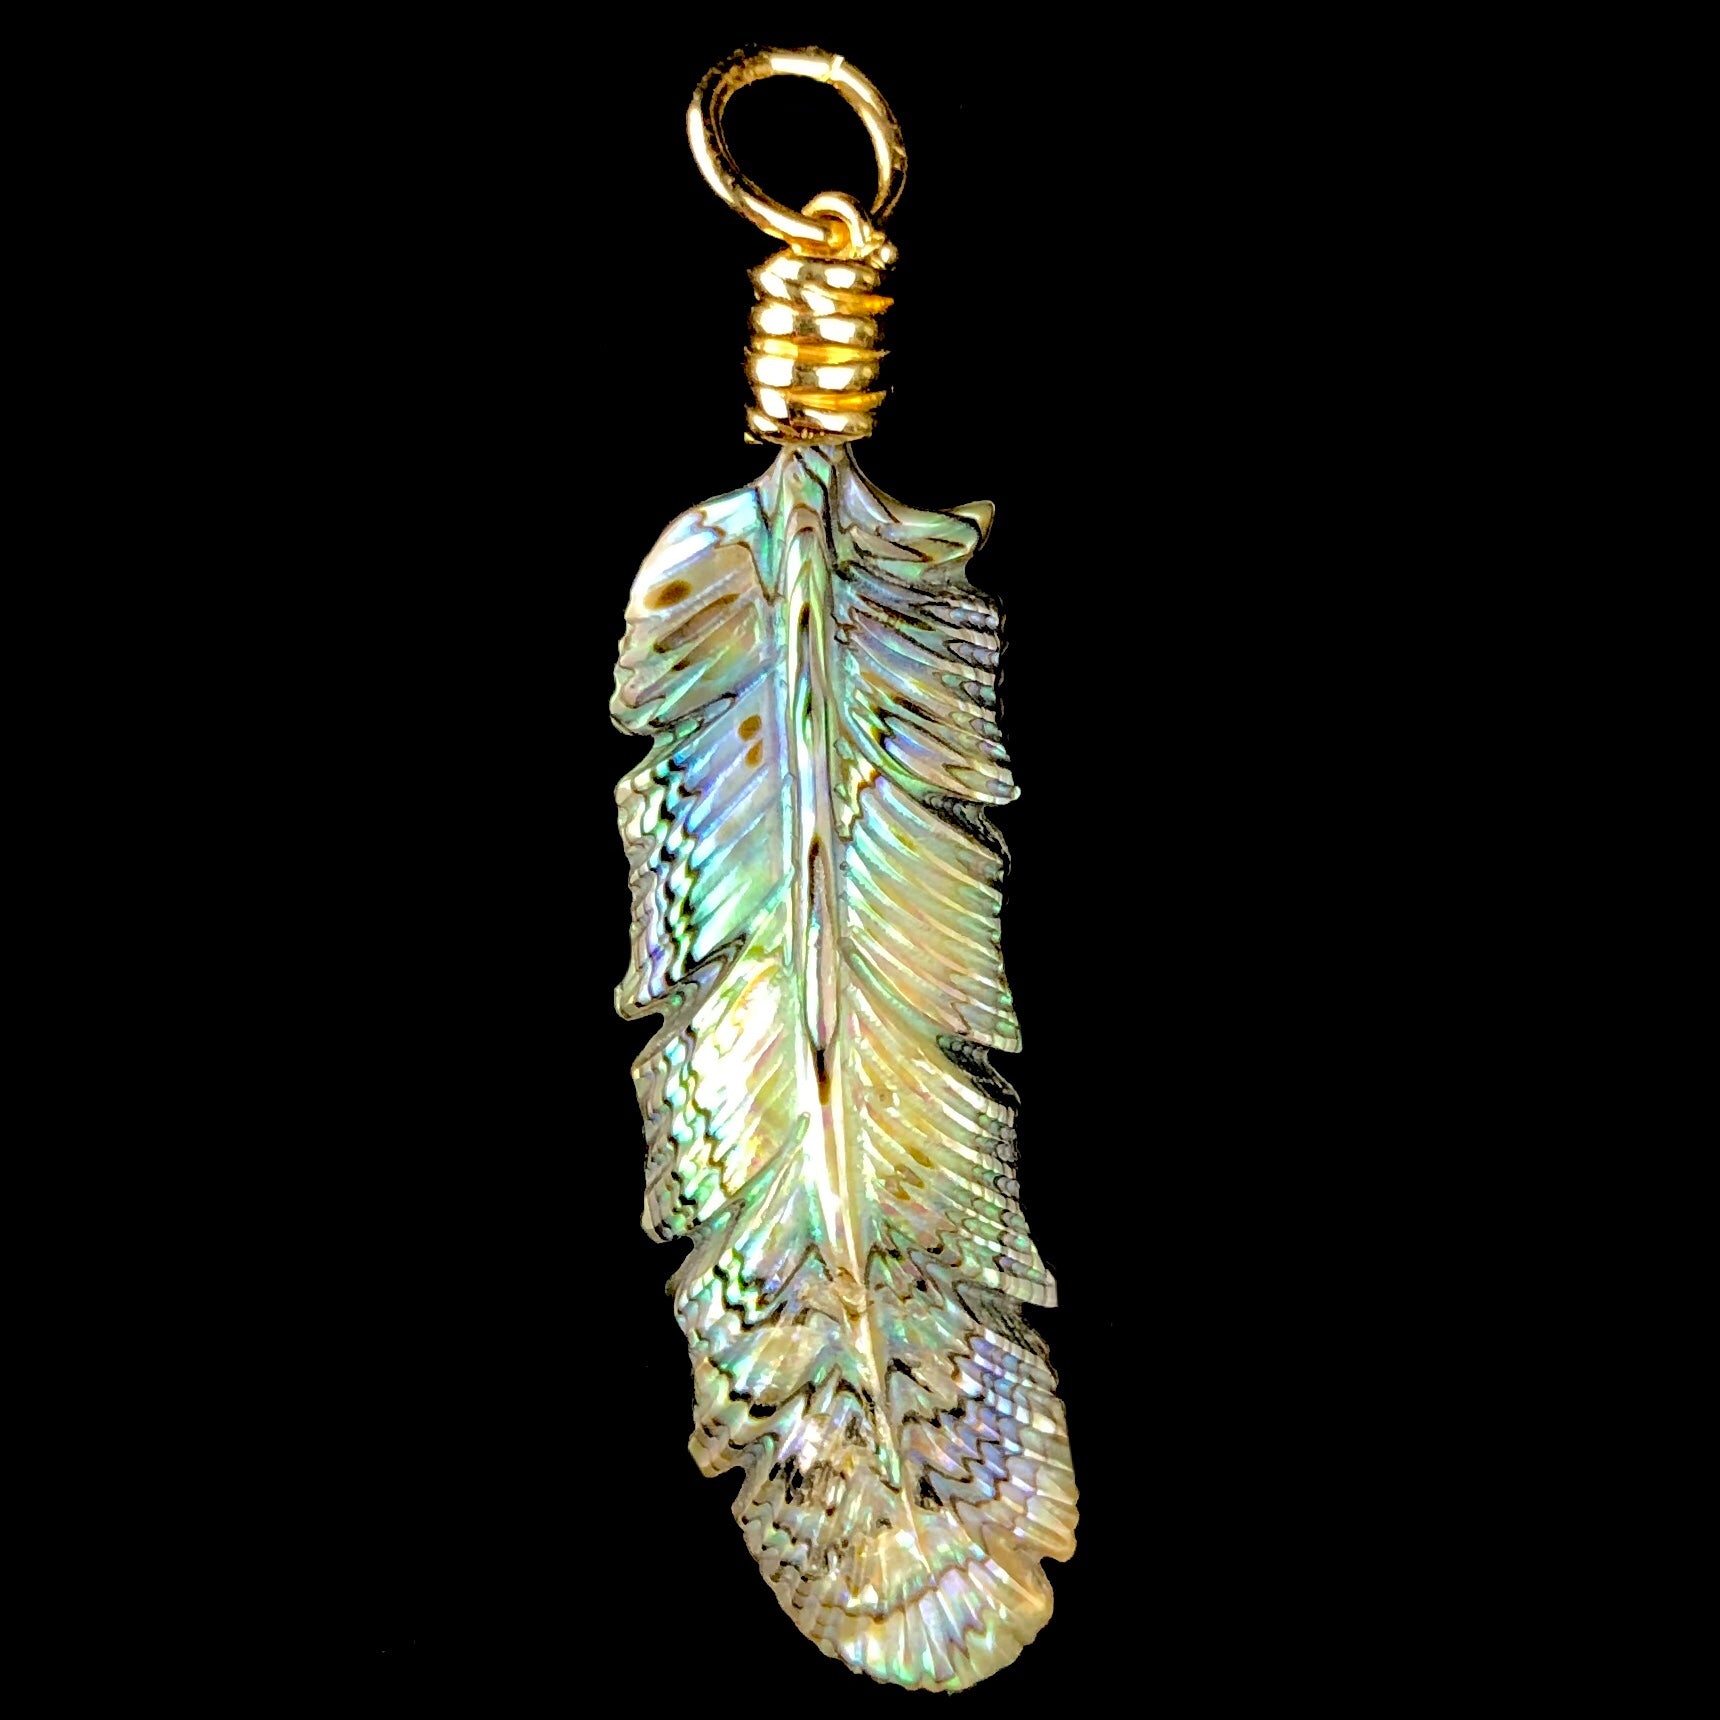 Back view of Luminescent Feather charm with yellow, green, blue and silver of abalone shell